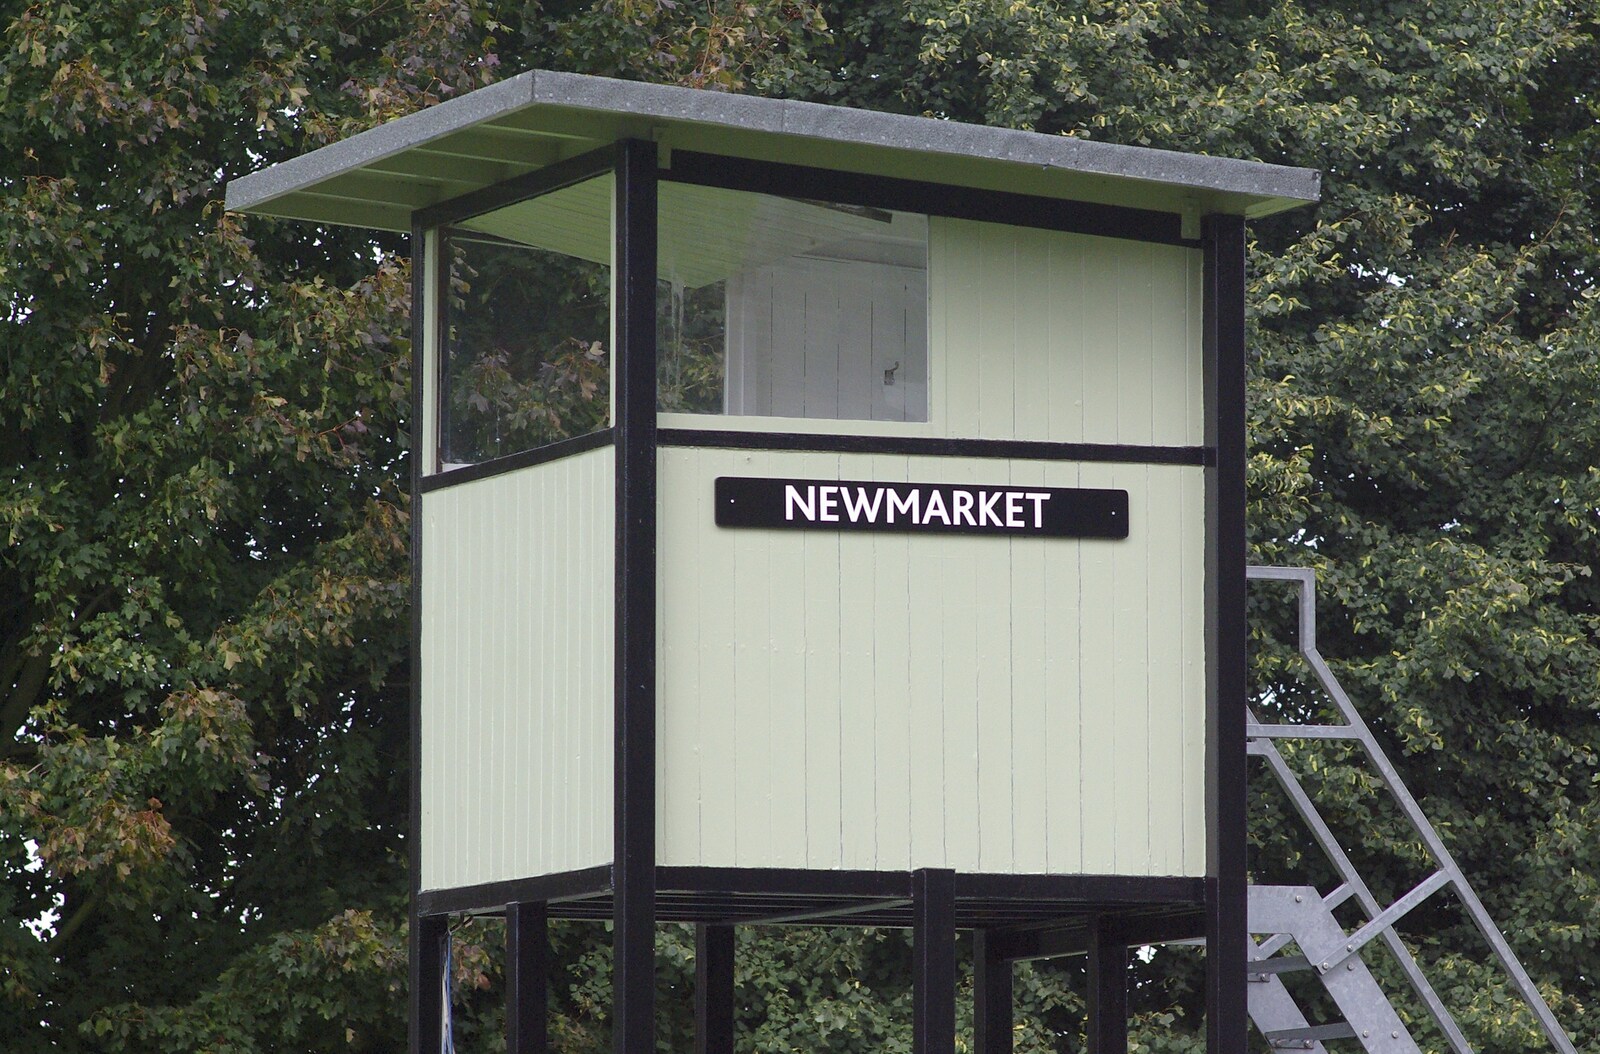 The Newmarket July Course lookout hut on stilts from A Day At The Races, Newmarket, Suffolk - 23rd August 2008